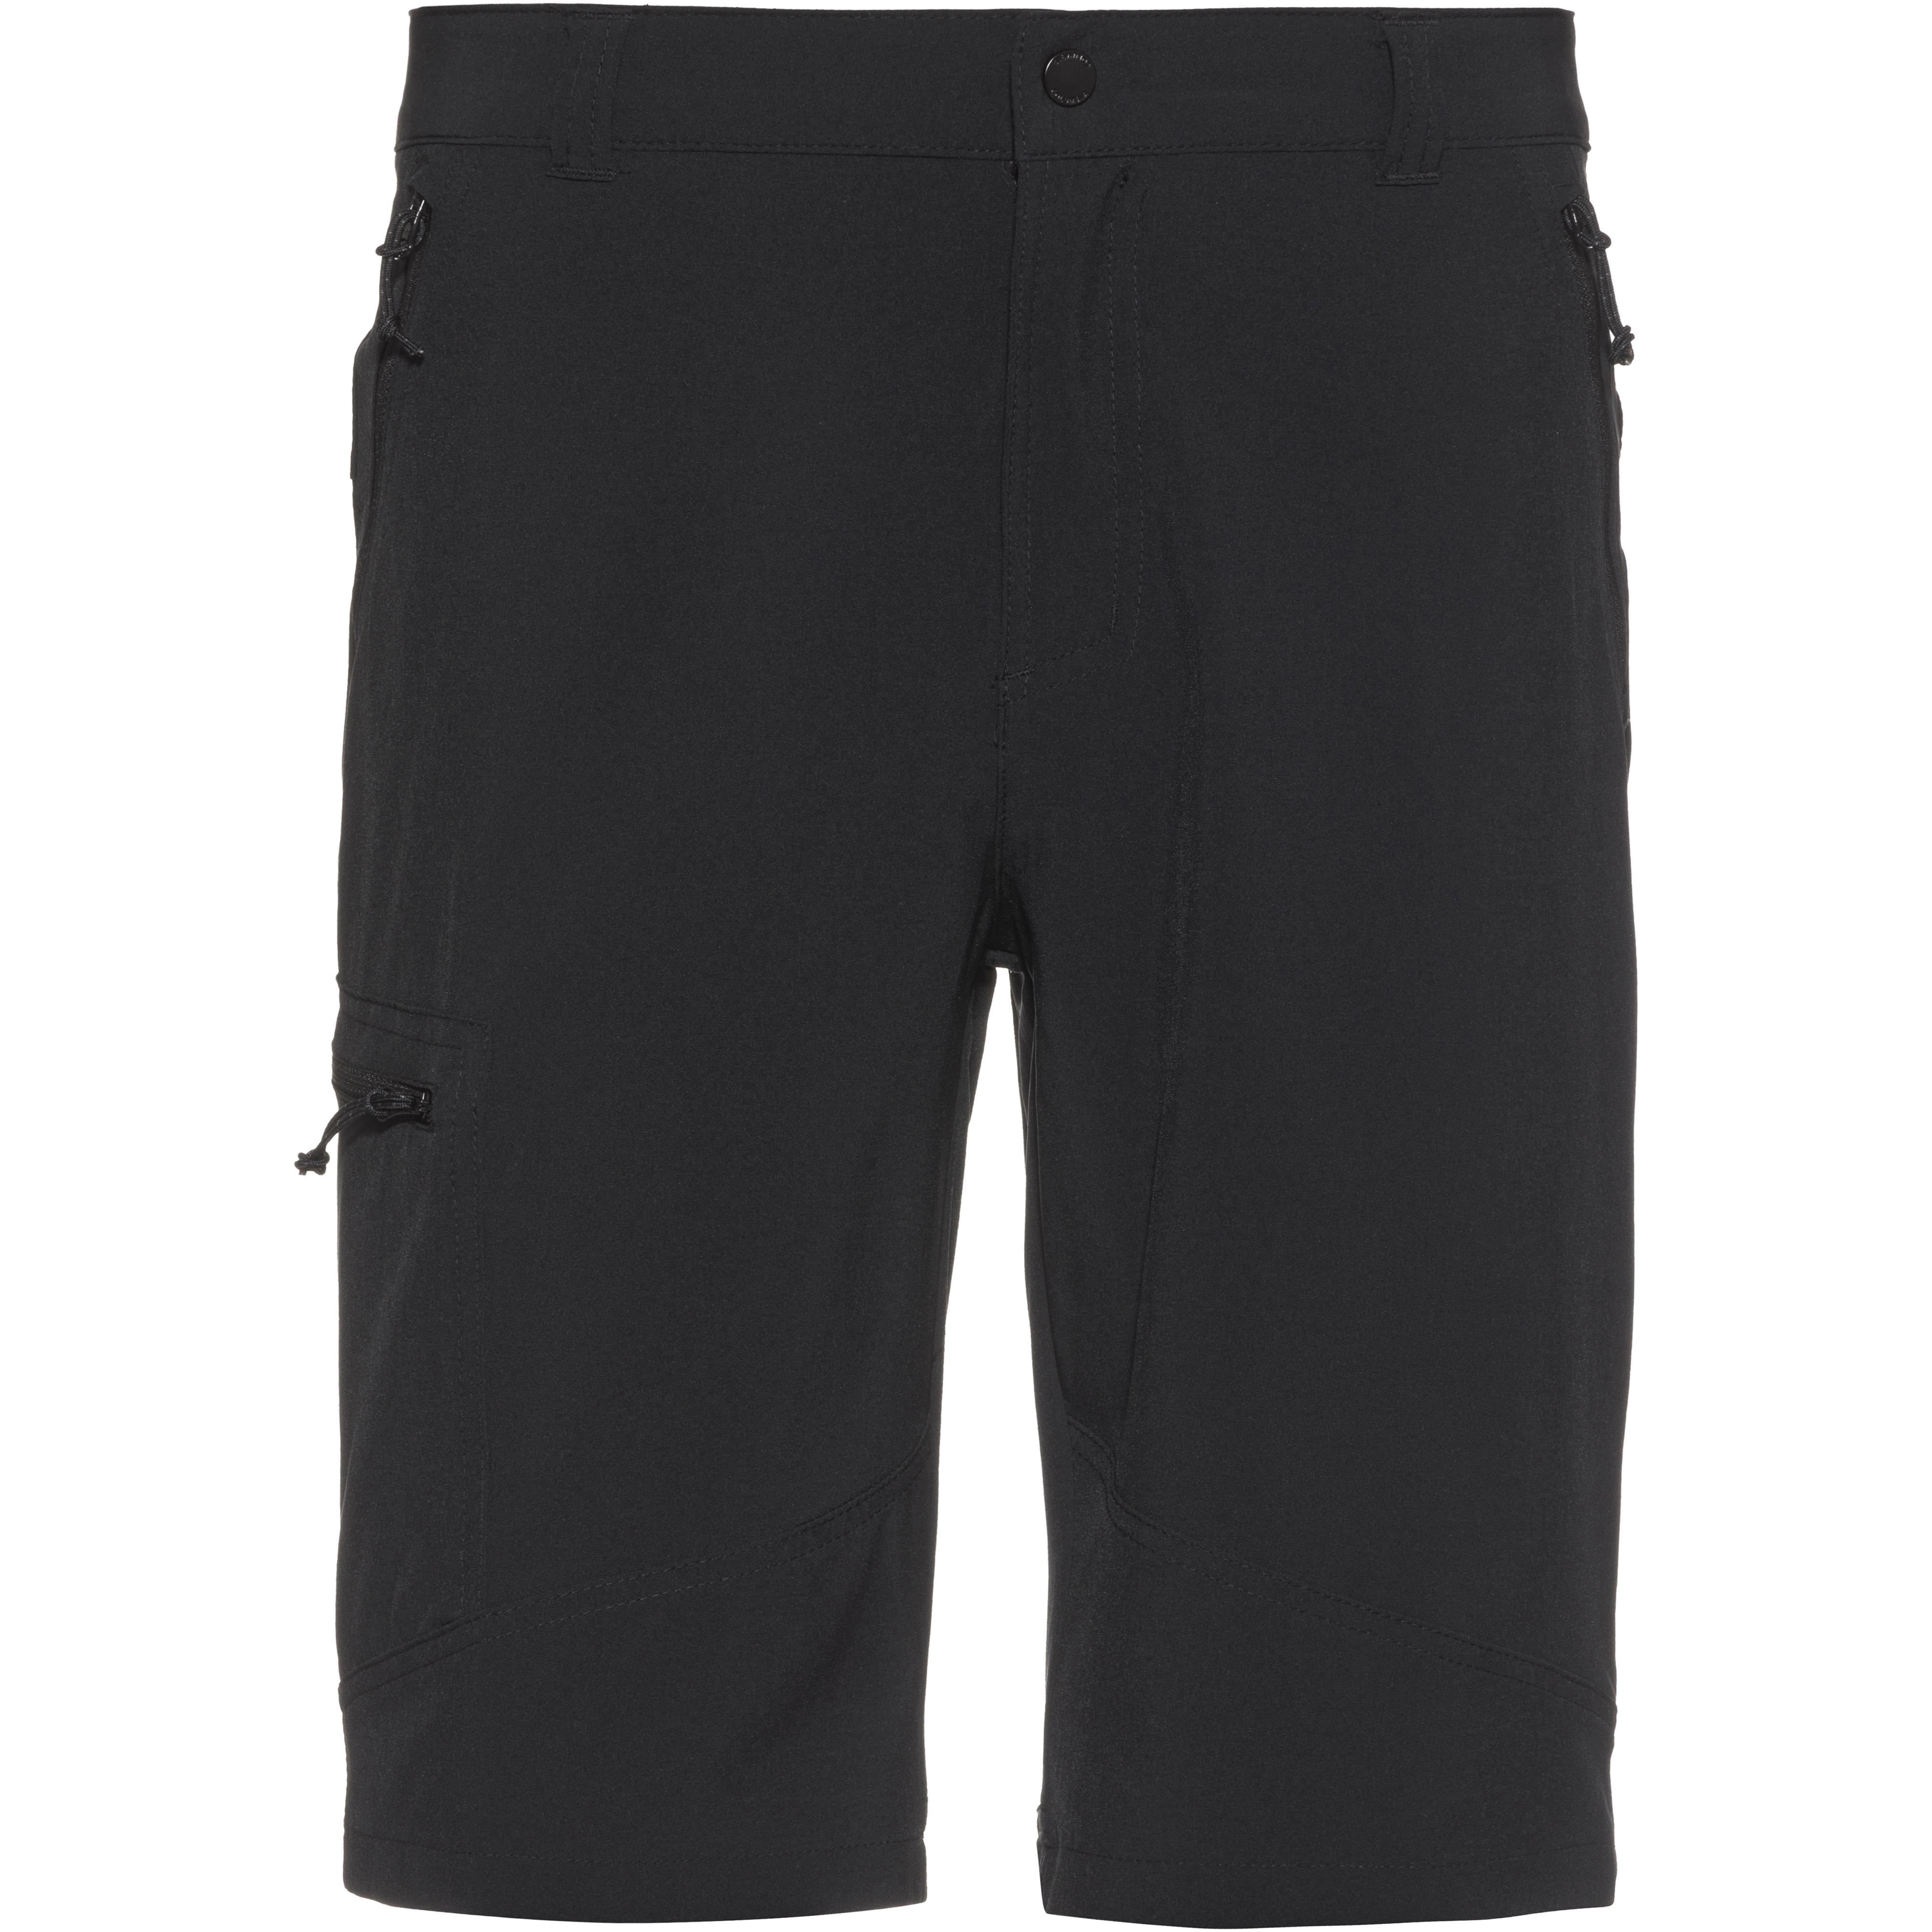 Image of Columbia Triple Canyon Funktionsshorts Herren